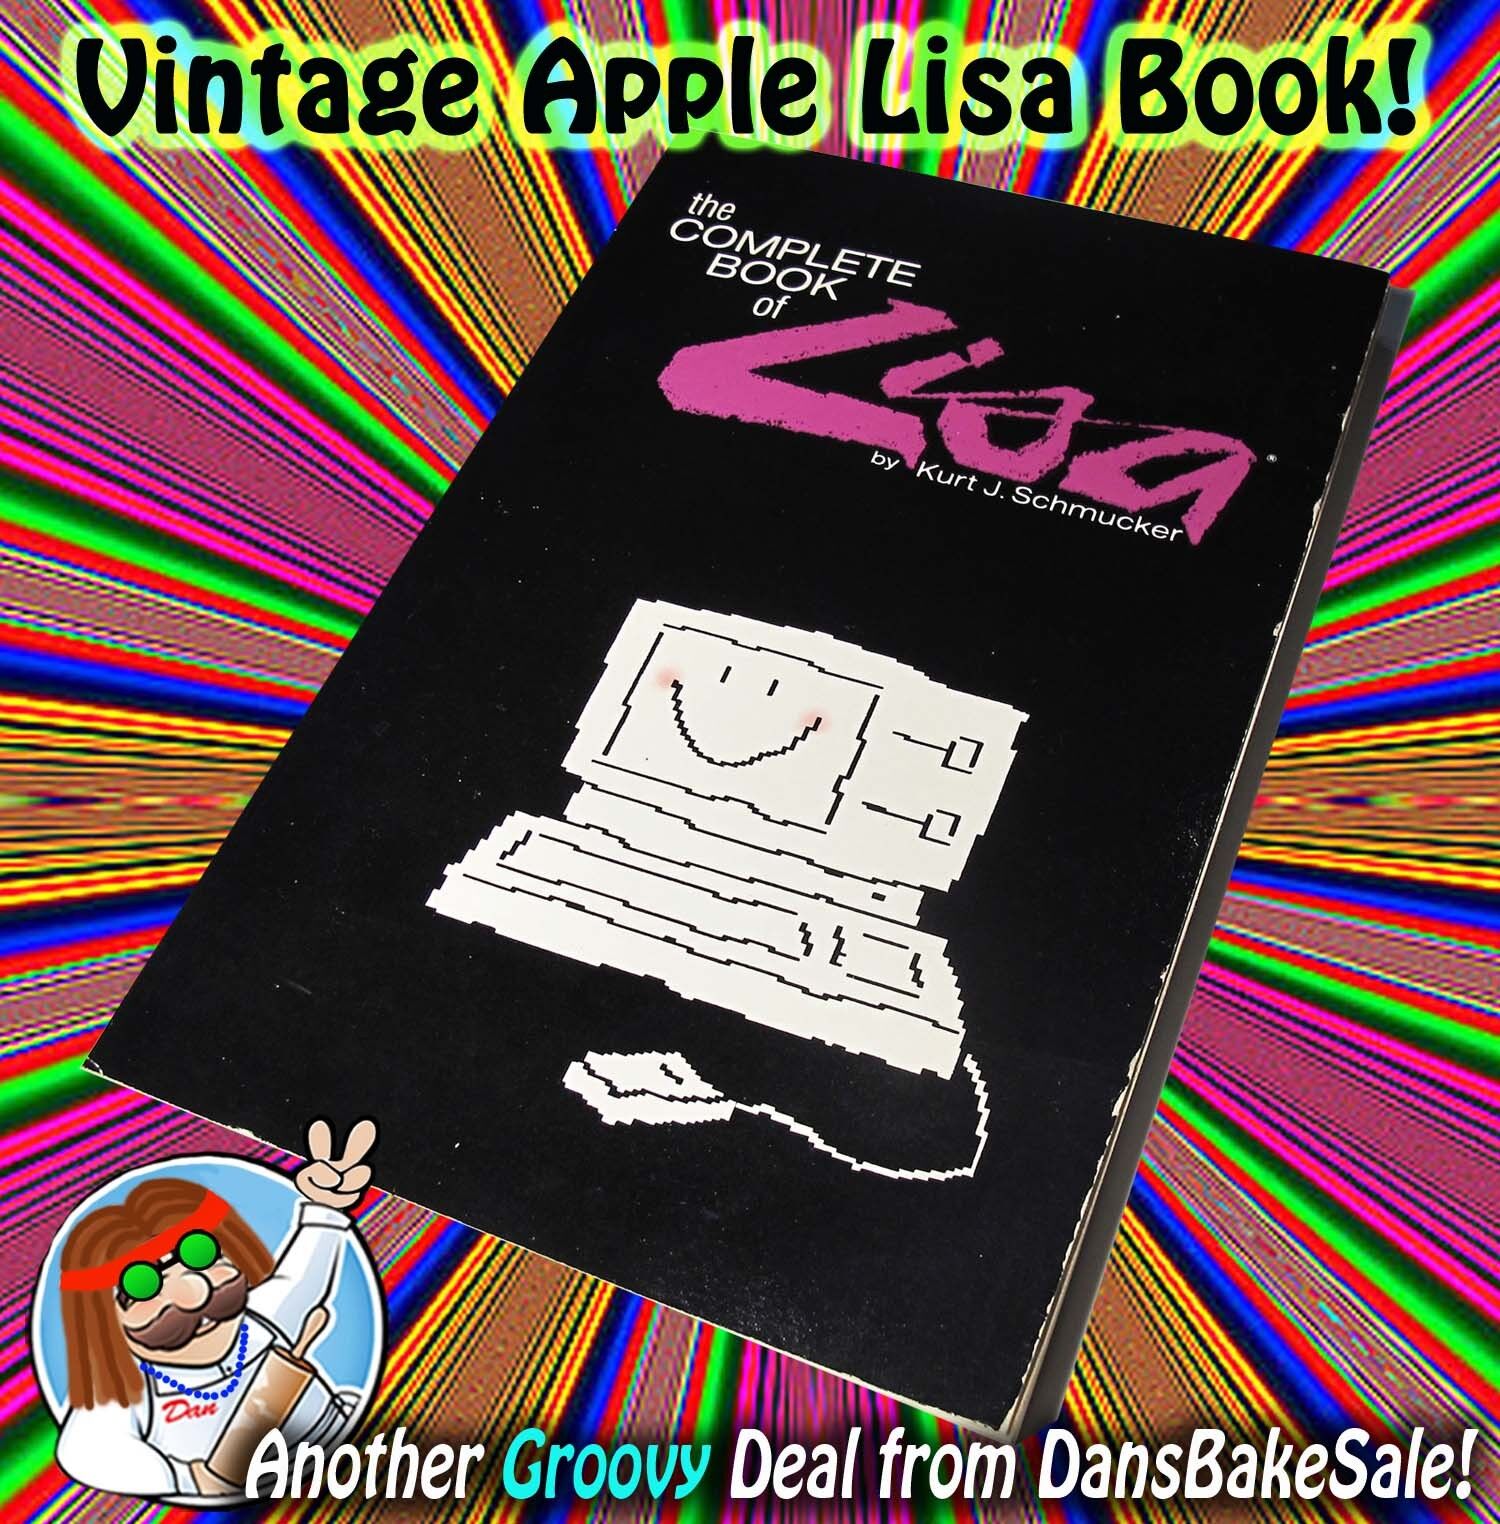 Rare Vintage 1984 The Complete Book of Apple Lisa Manual by Kurt Schmucker WOW